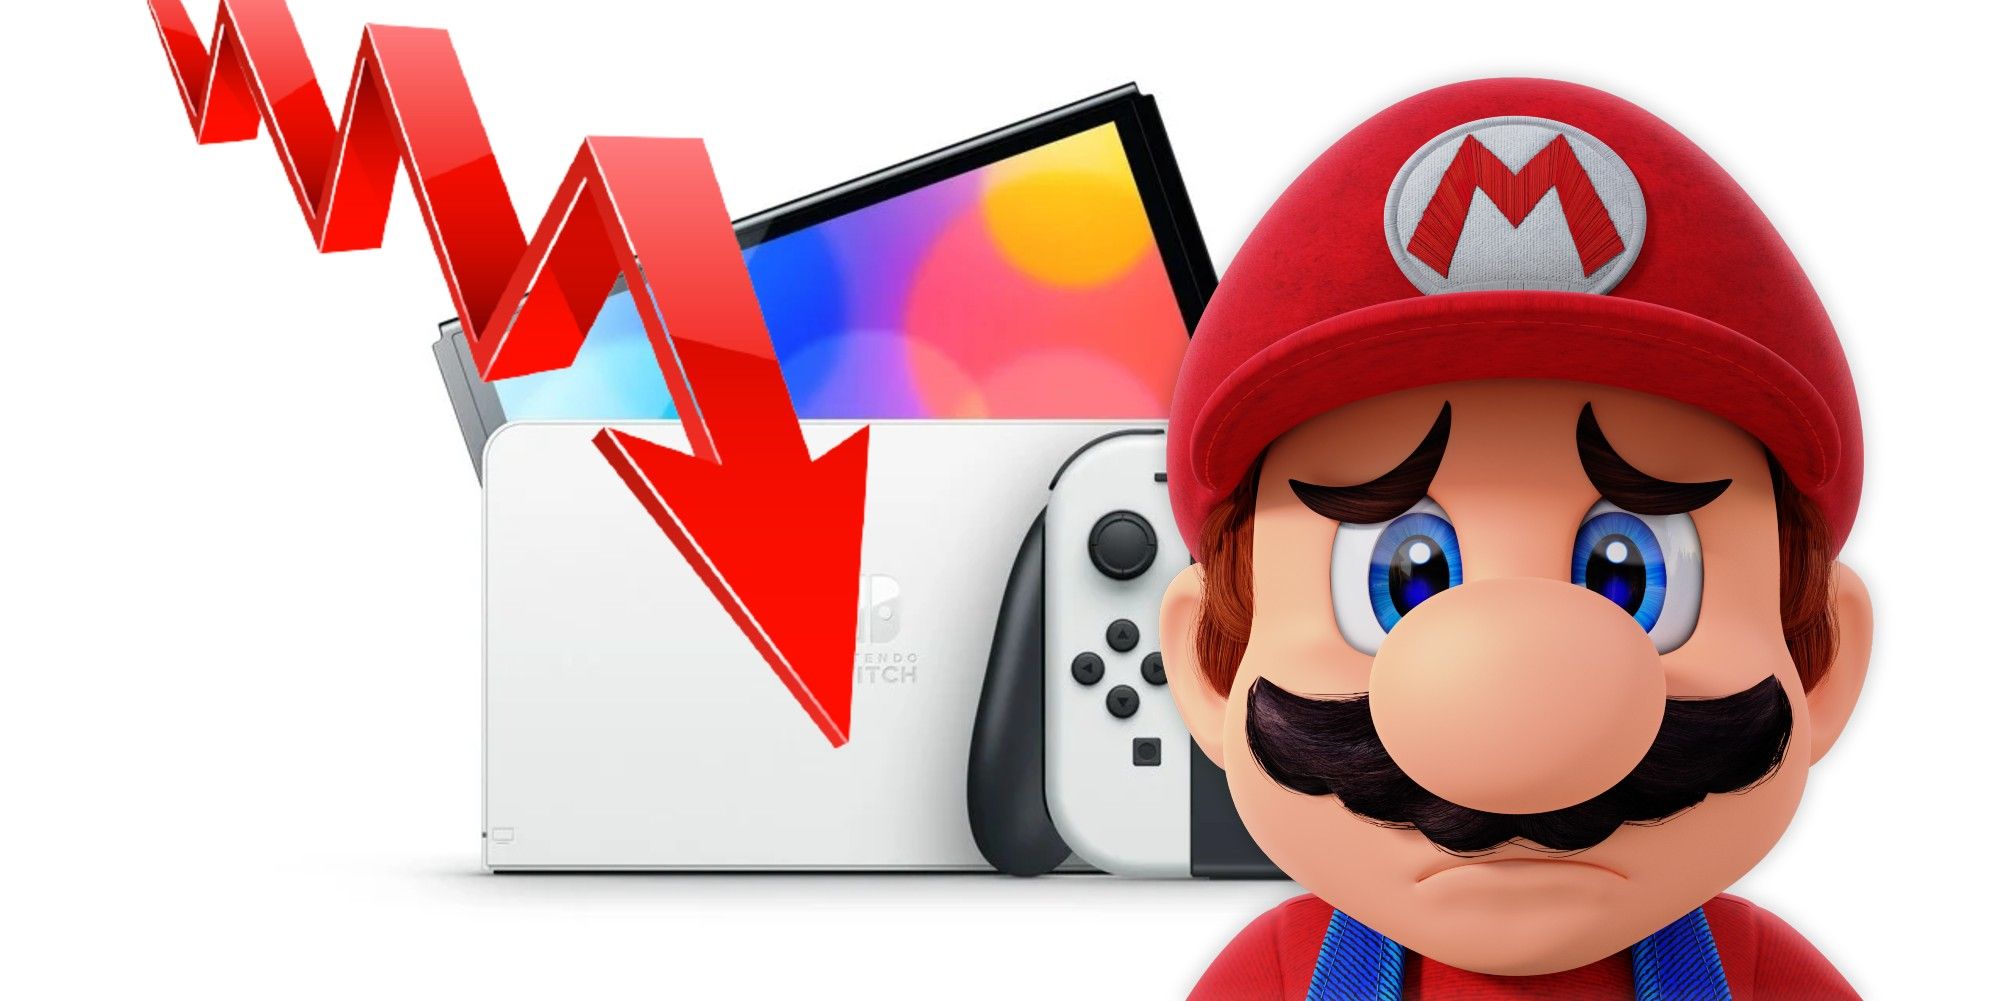 Nintendo Stock Prices Have Seen The Biggest Drop In Two Years